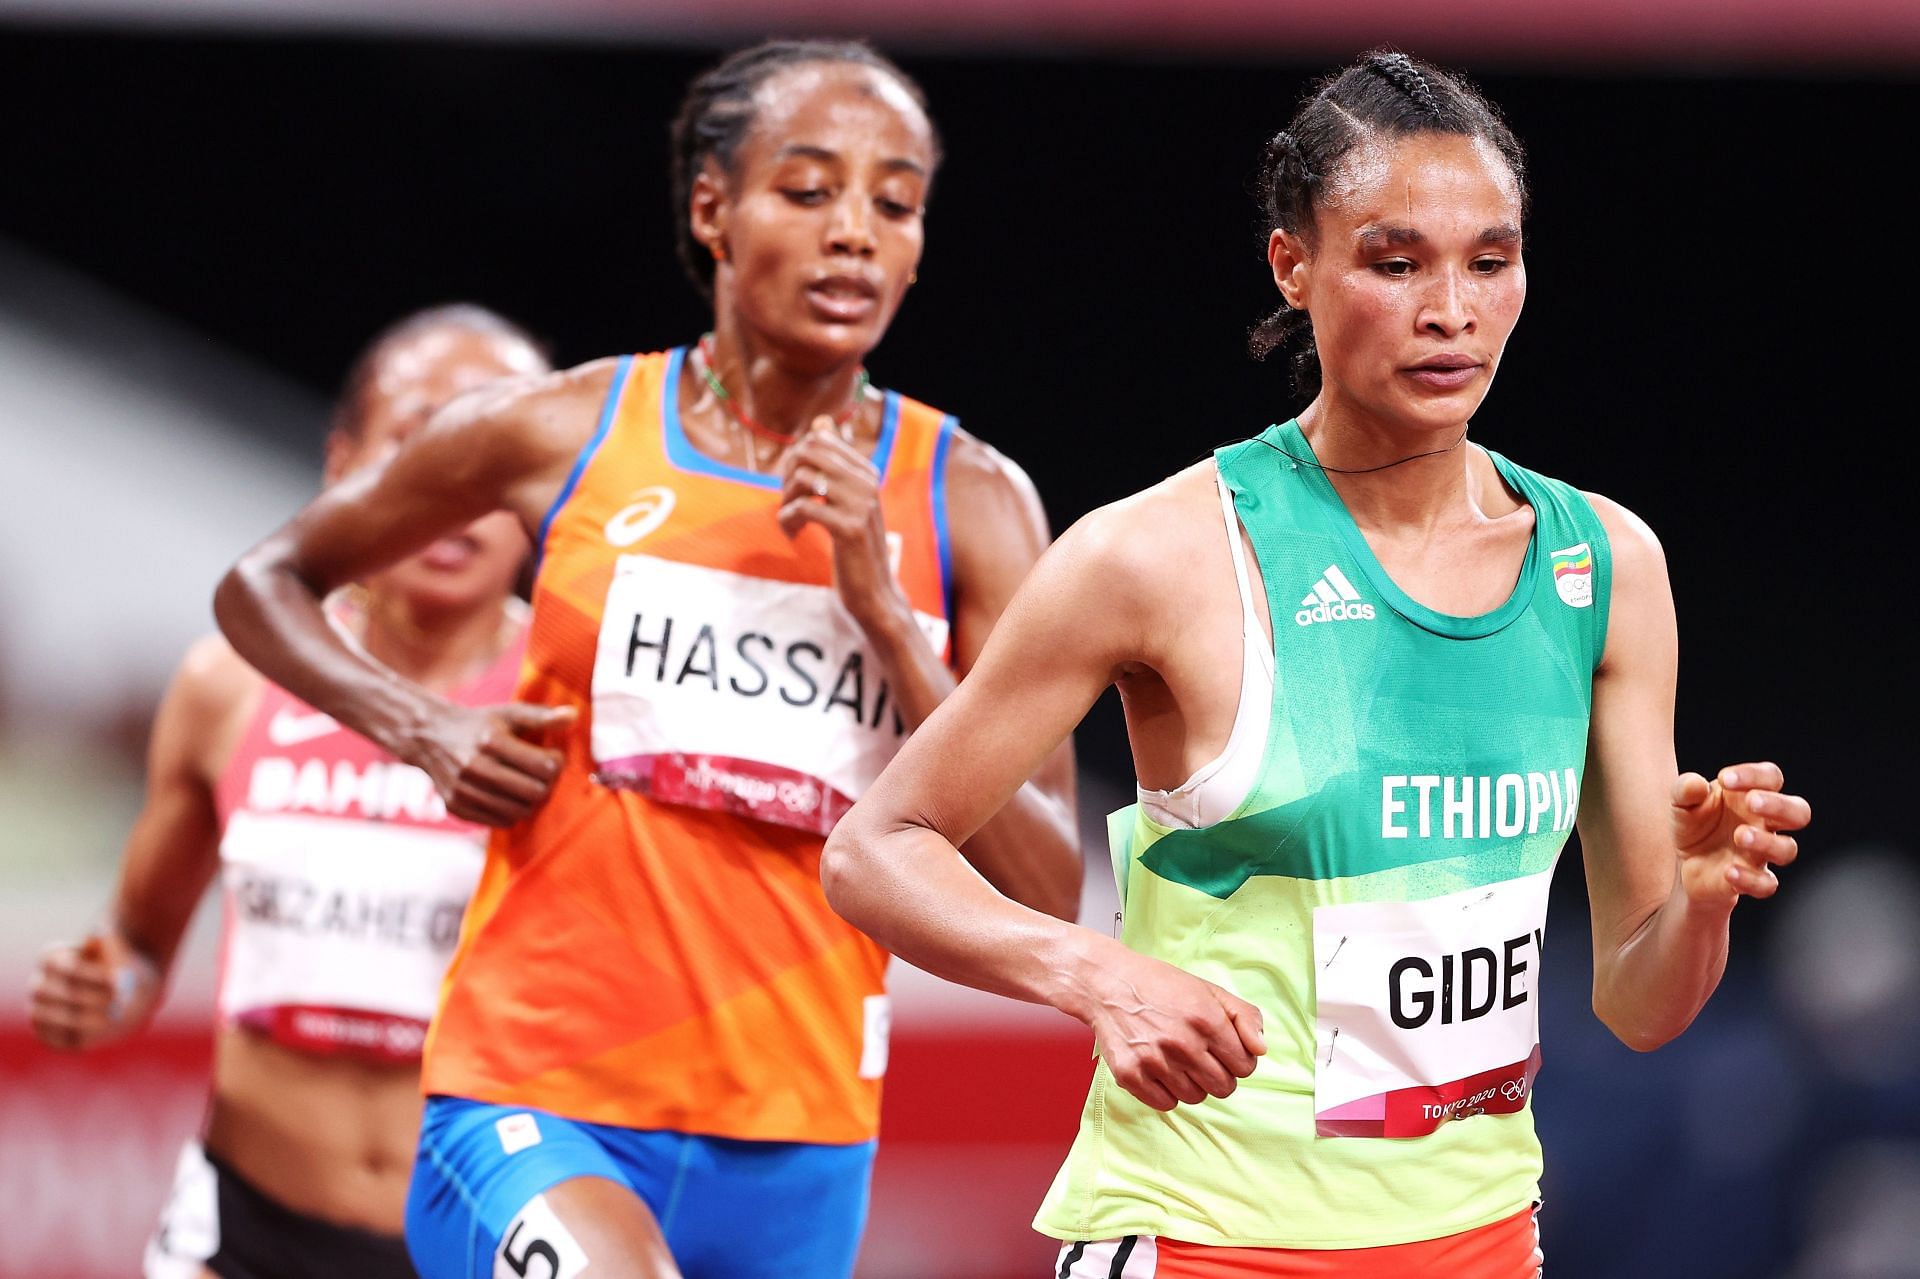 Letesenbet Gidey in action at the Tokyo Olympics. (PC: Getty Images)